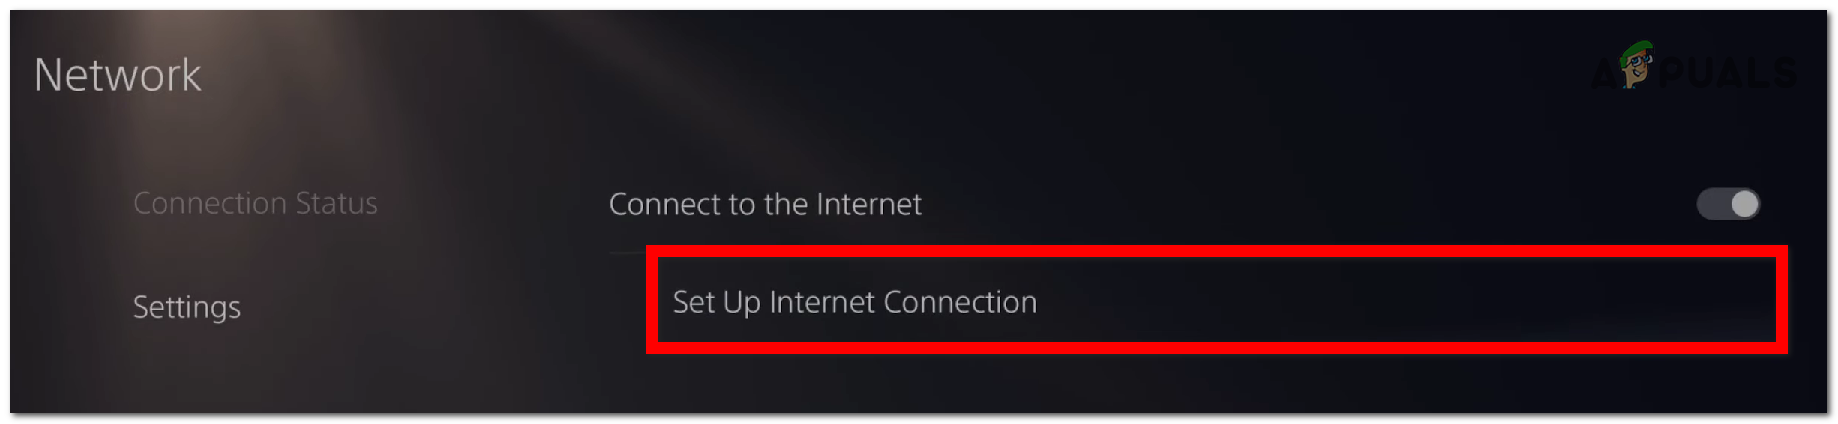 Setting Up your Internet Connection